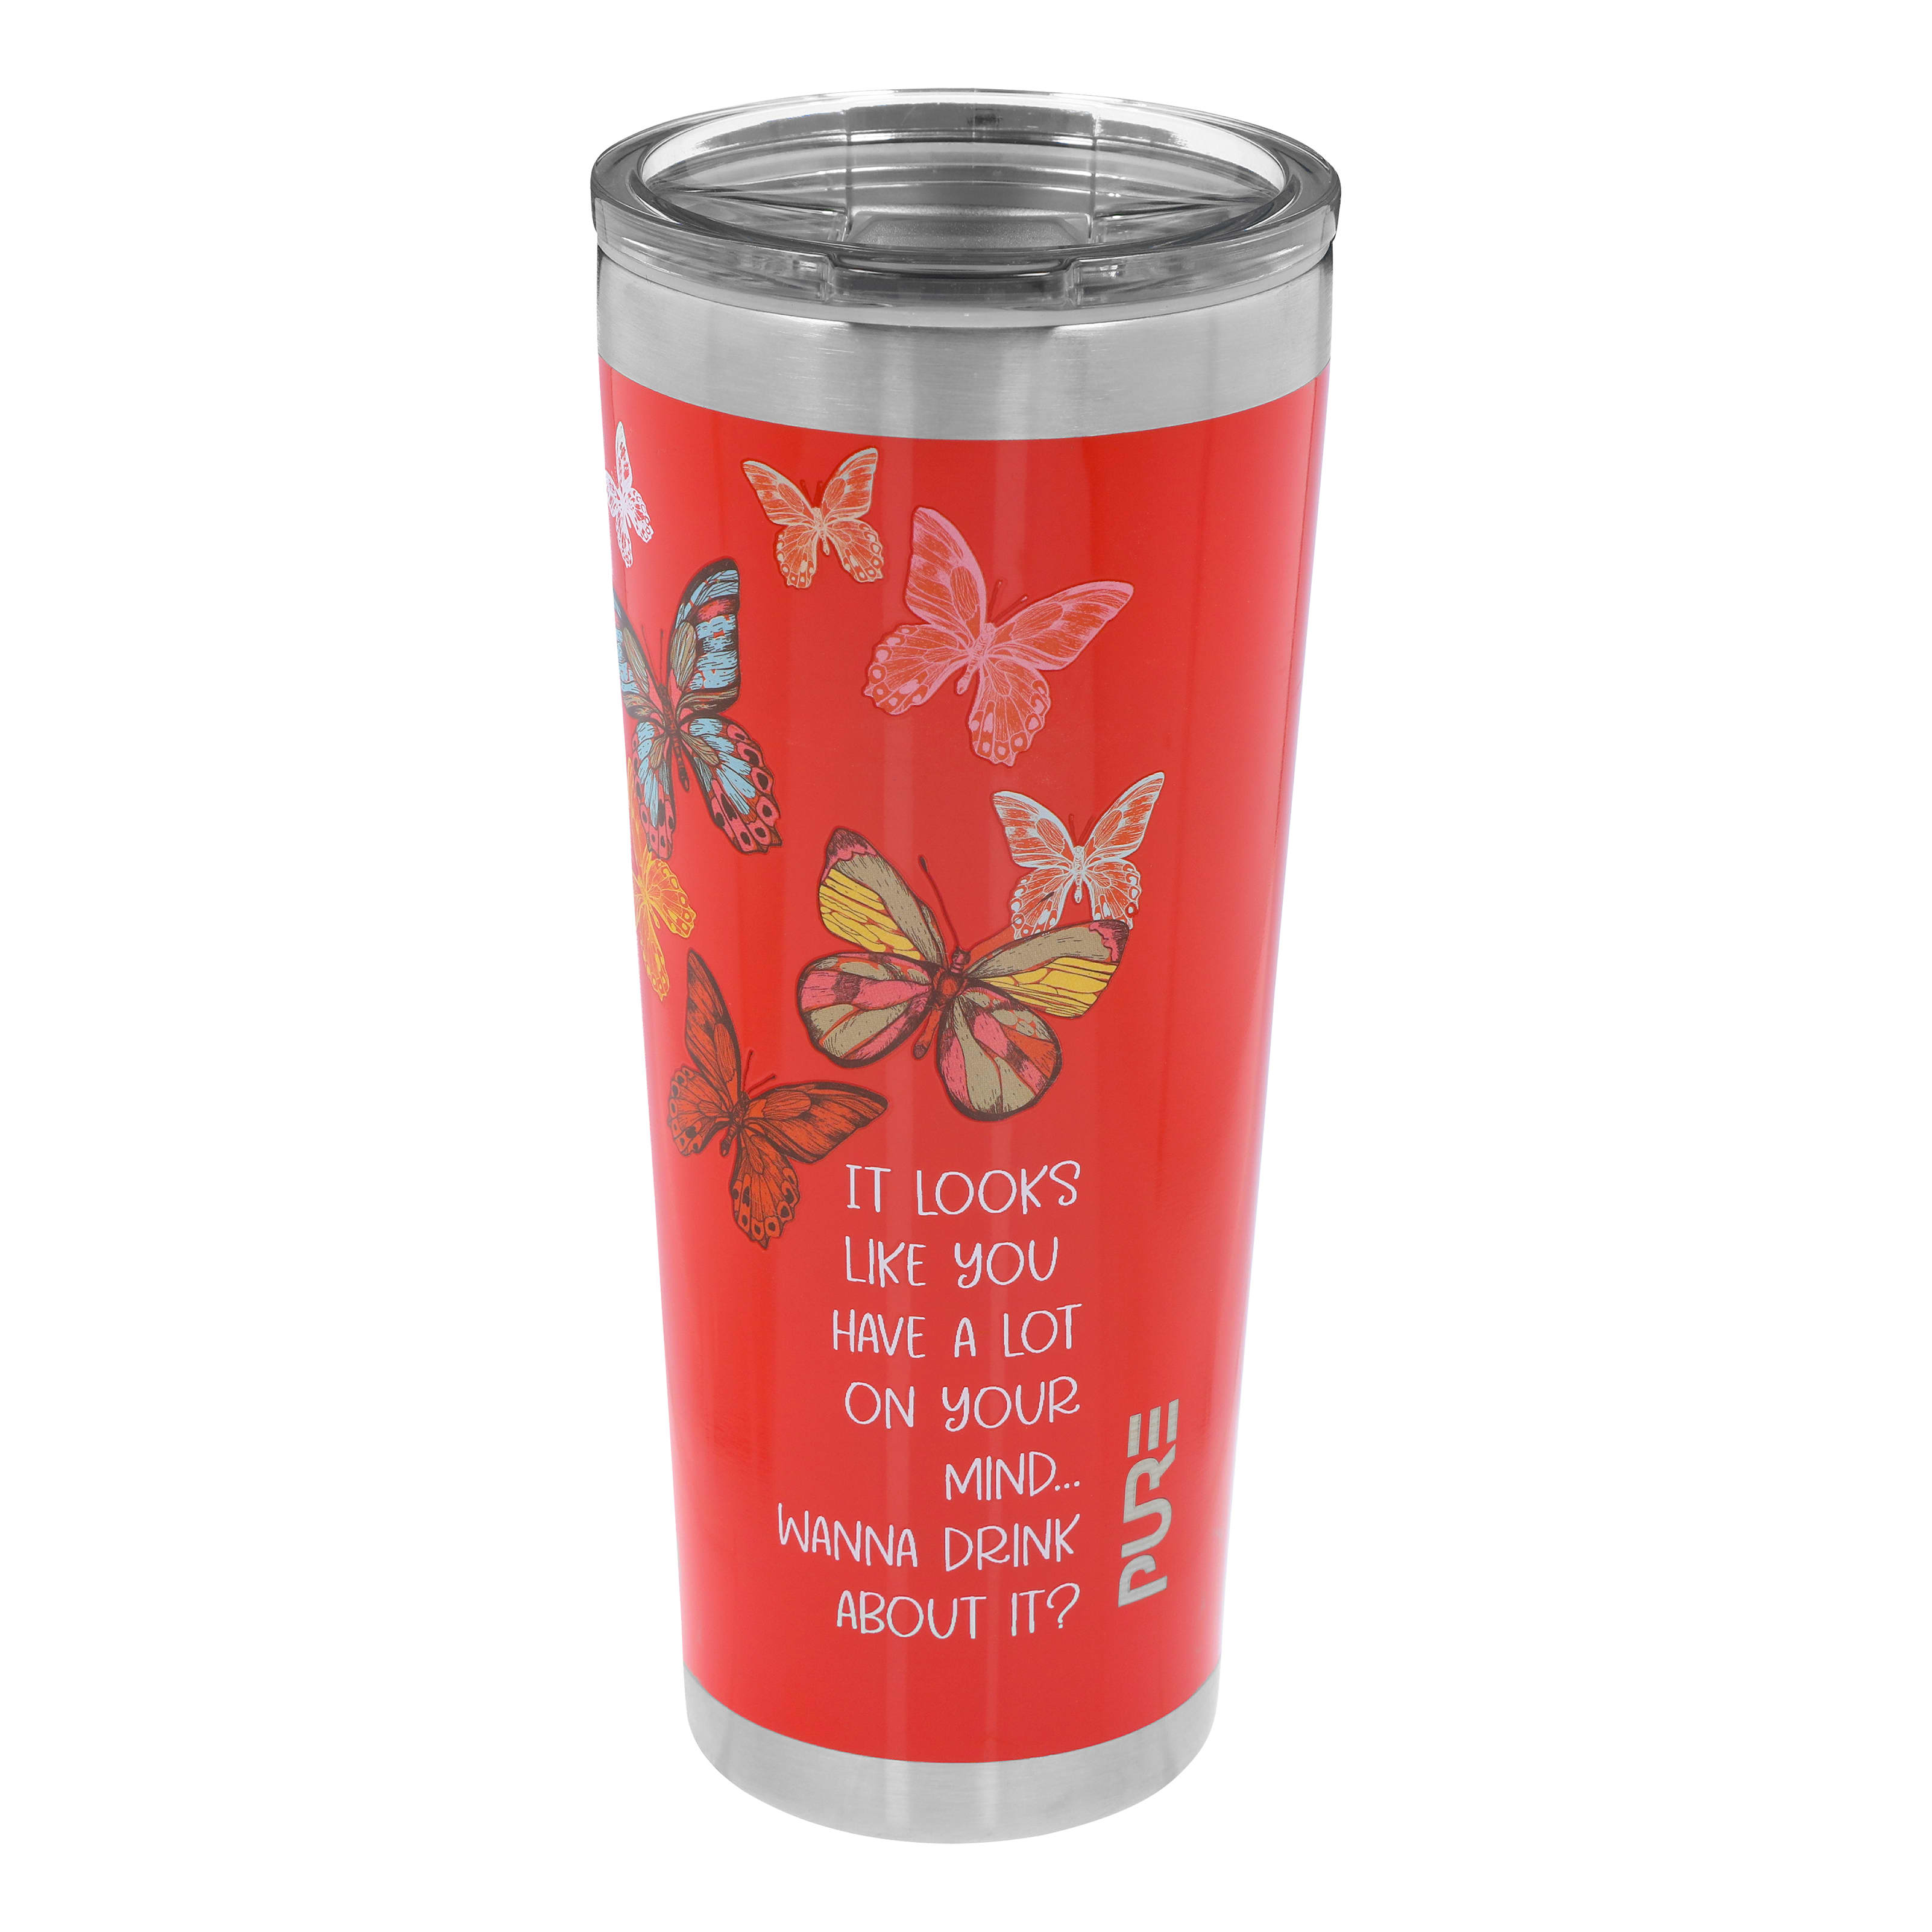 KOVOT His & Hers Split 20 Oz Tumbler - Share The Cup, Without The Drink